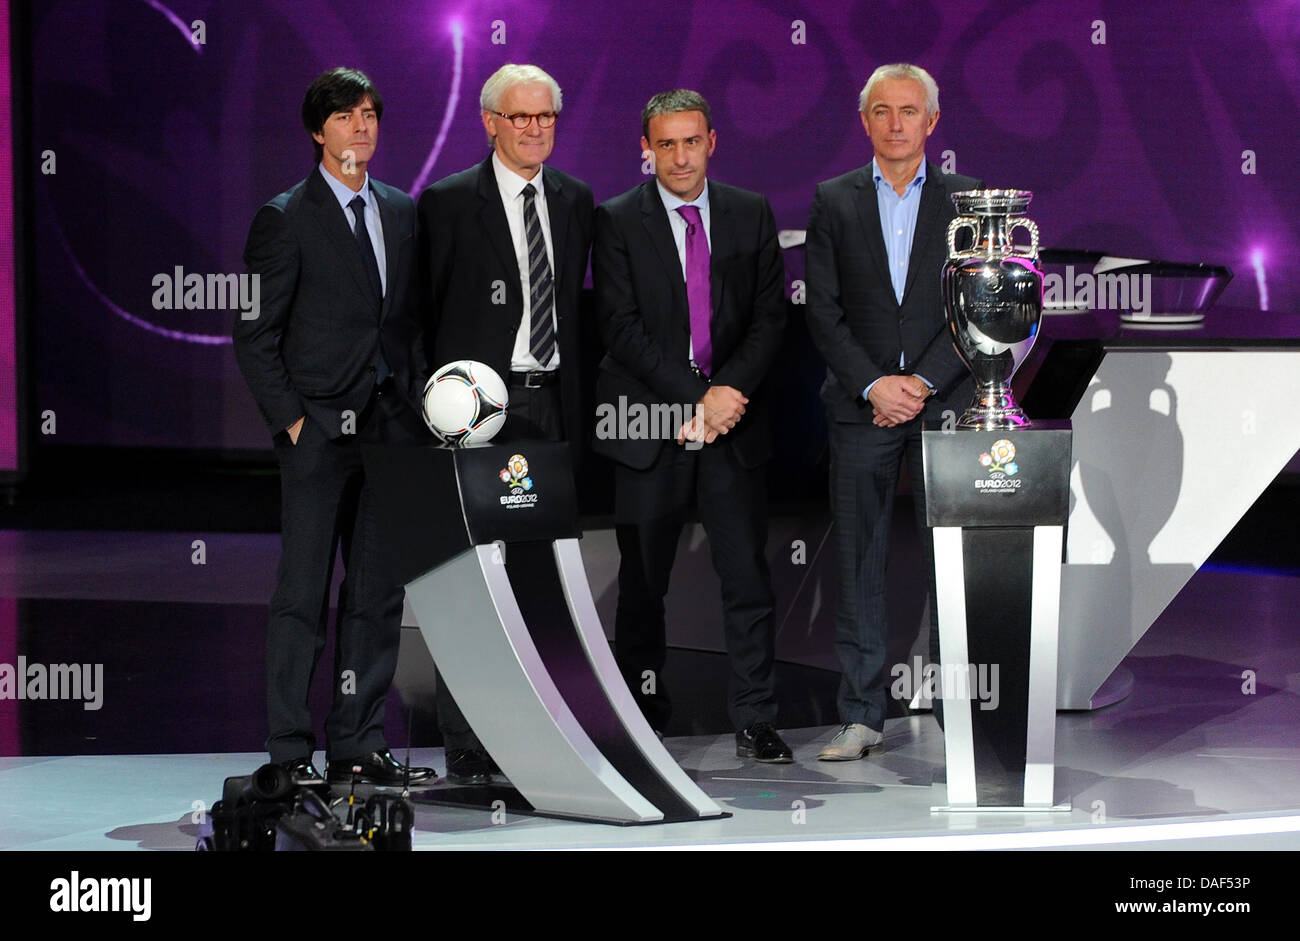 The coaches of group B Joachim Löw (Germany), Morton Olson (Denmark), Paulo Bento (Portugal) and Bert van Marwijk (Netherlands, from left to right)) stay at the stage during the final draw for the UEFA EURO 2012 soccer championships at the Palace of Arts in Kiev, Ukraine, 02 December 2012. The European soccer championships will take place from 08 June to 01 July 2012 in Poland and  Stock Photo